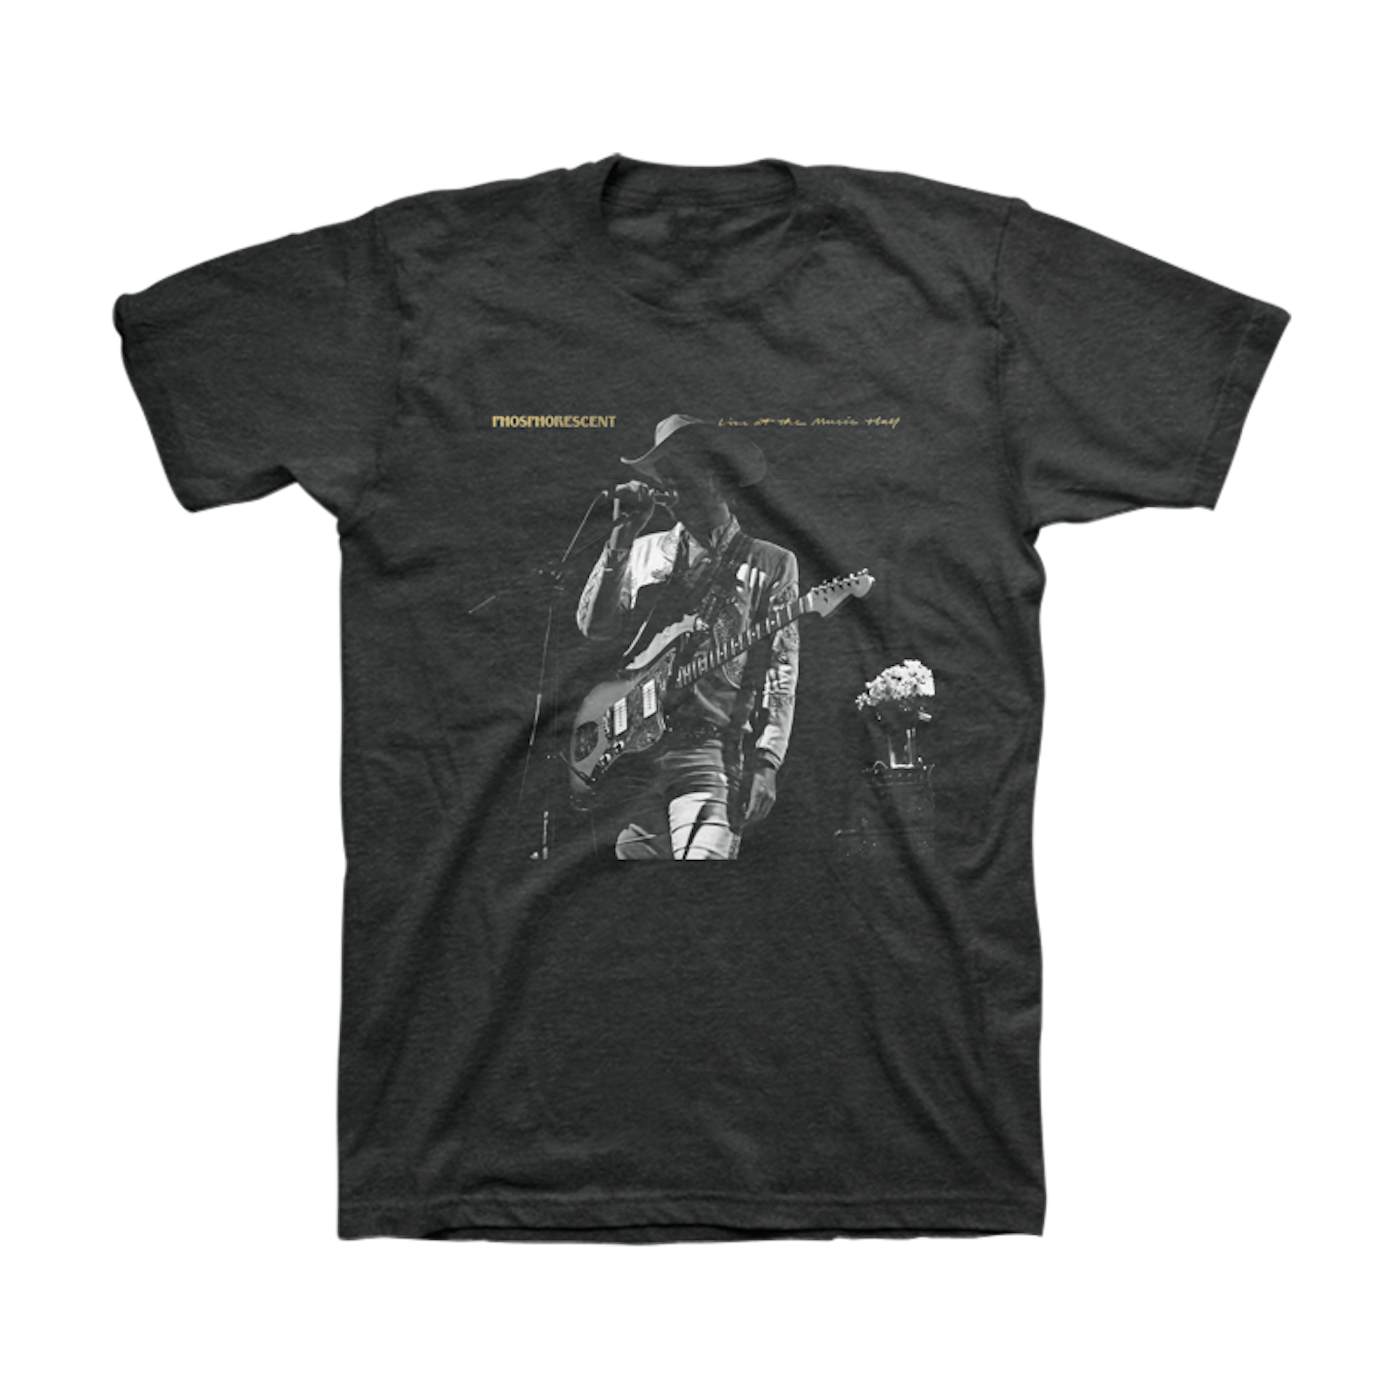 Phosphorescent Live at the Music Hall Tee